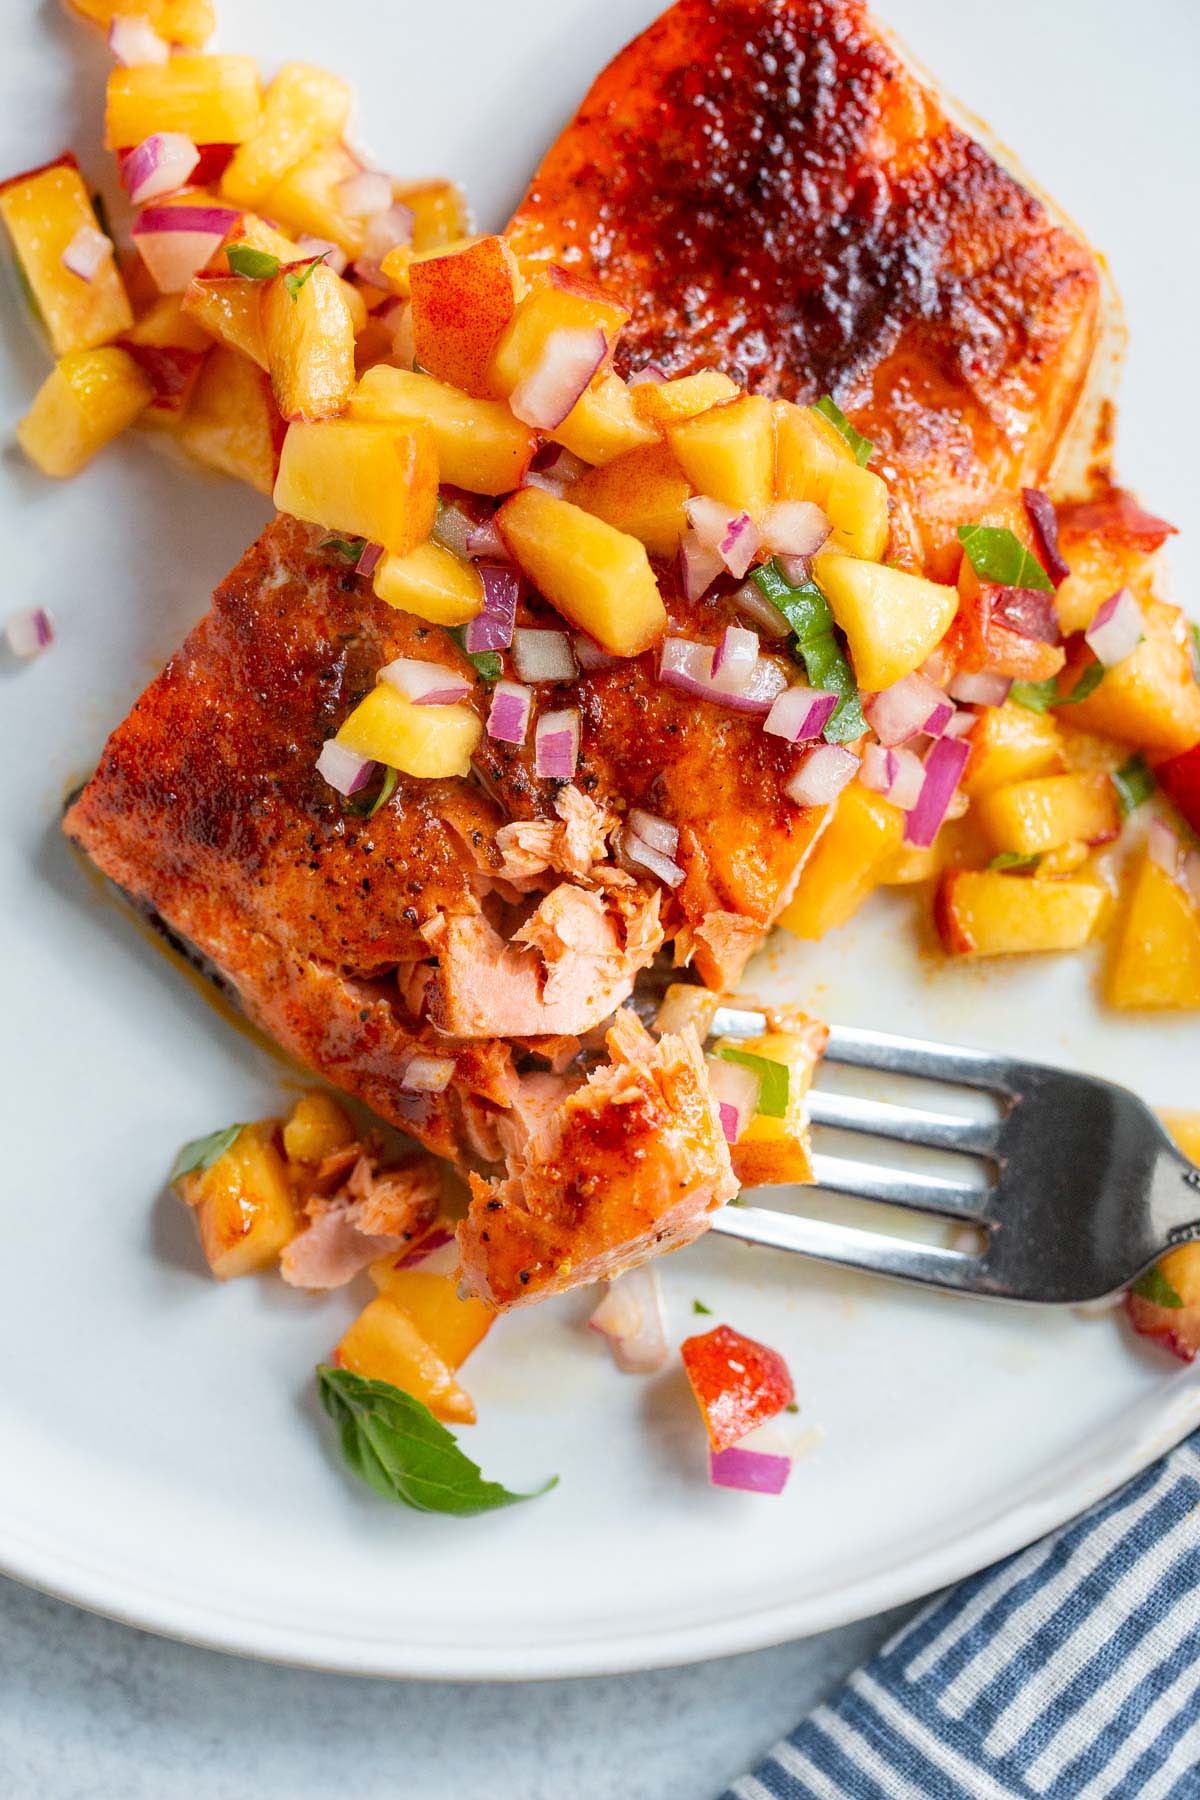 Salmon topped with peach salsa.